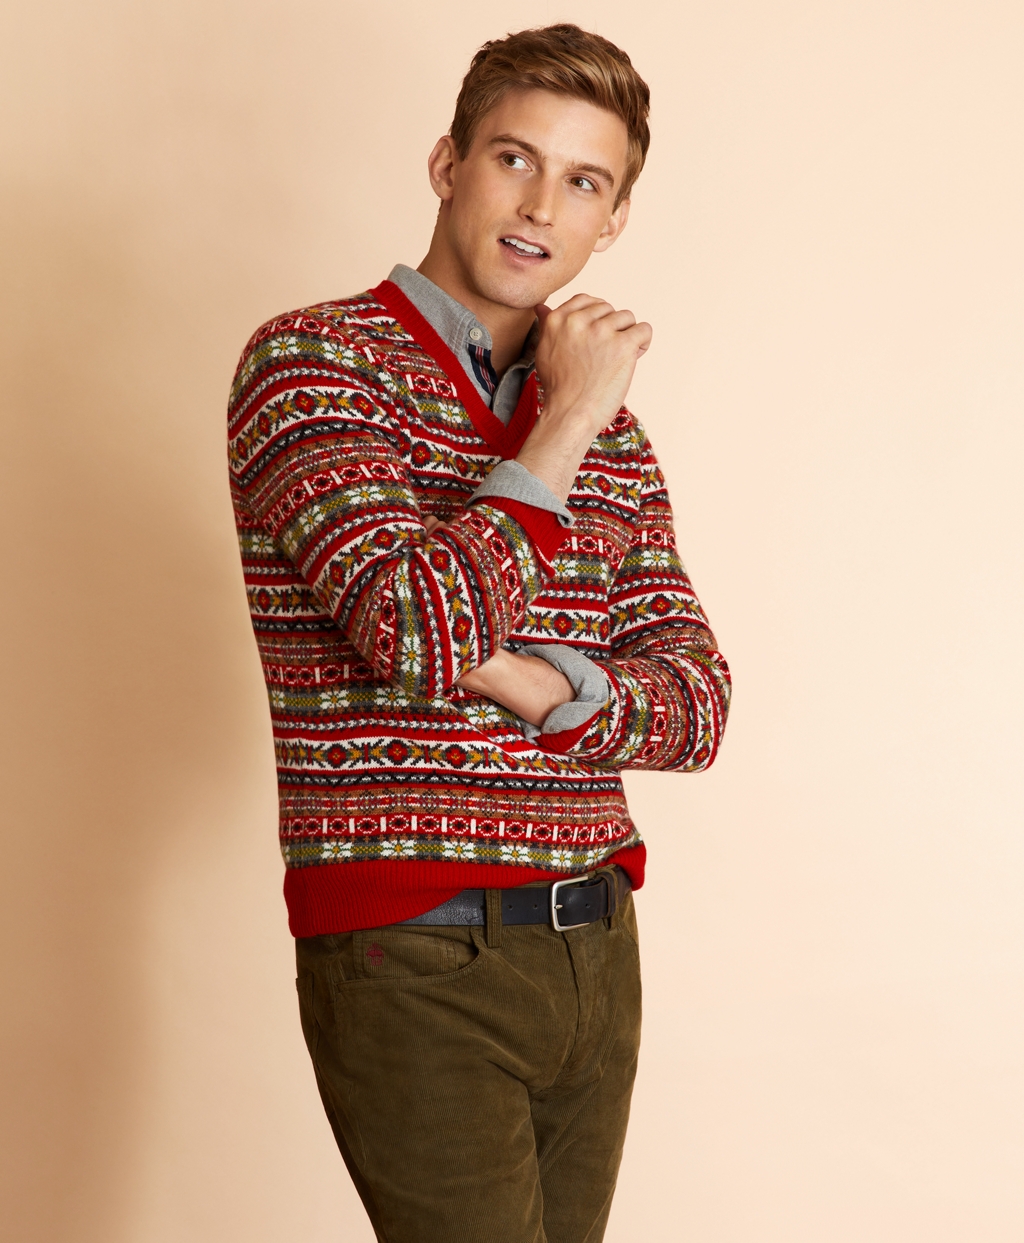 Men's Vintage Sweaters - 1920s to 1960s Retro Jumpers